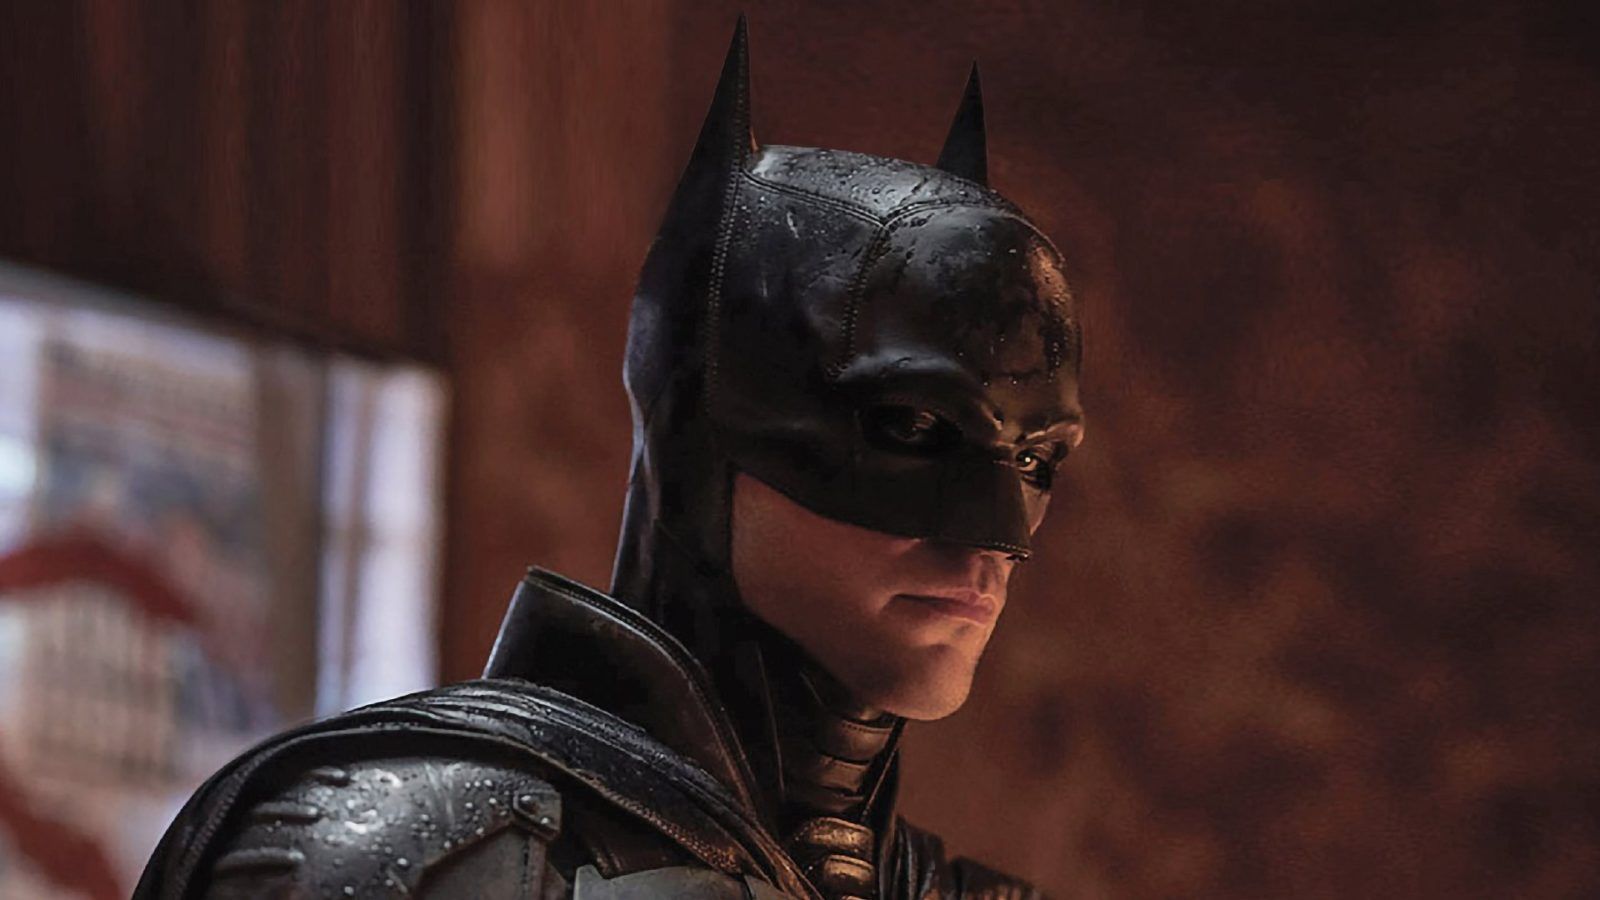 True DC fans must watch these 'Batman' movies and series